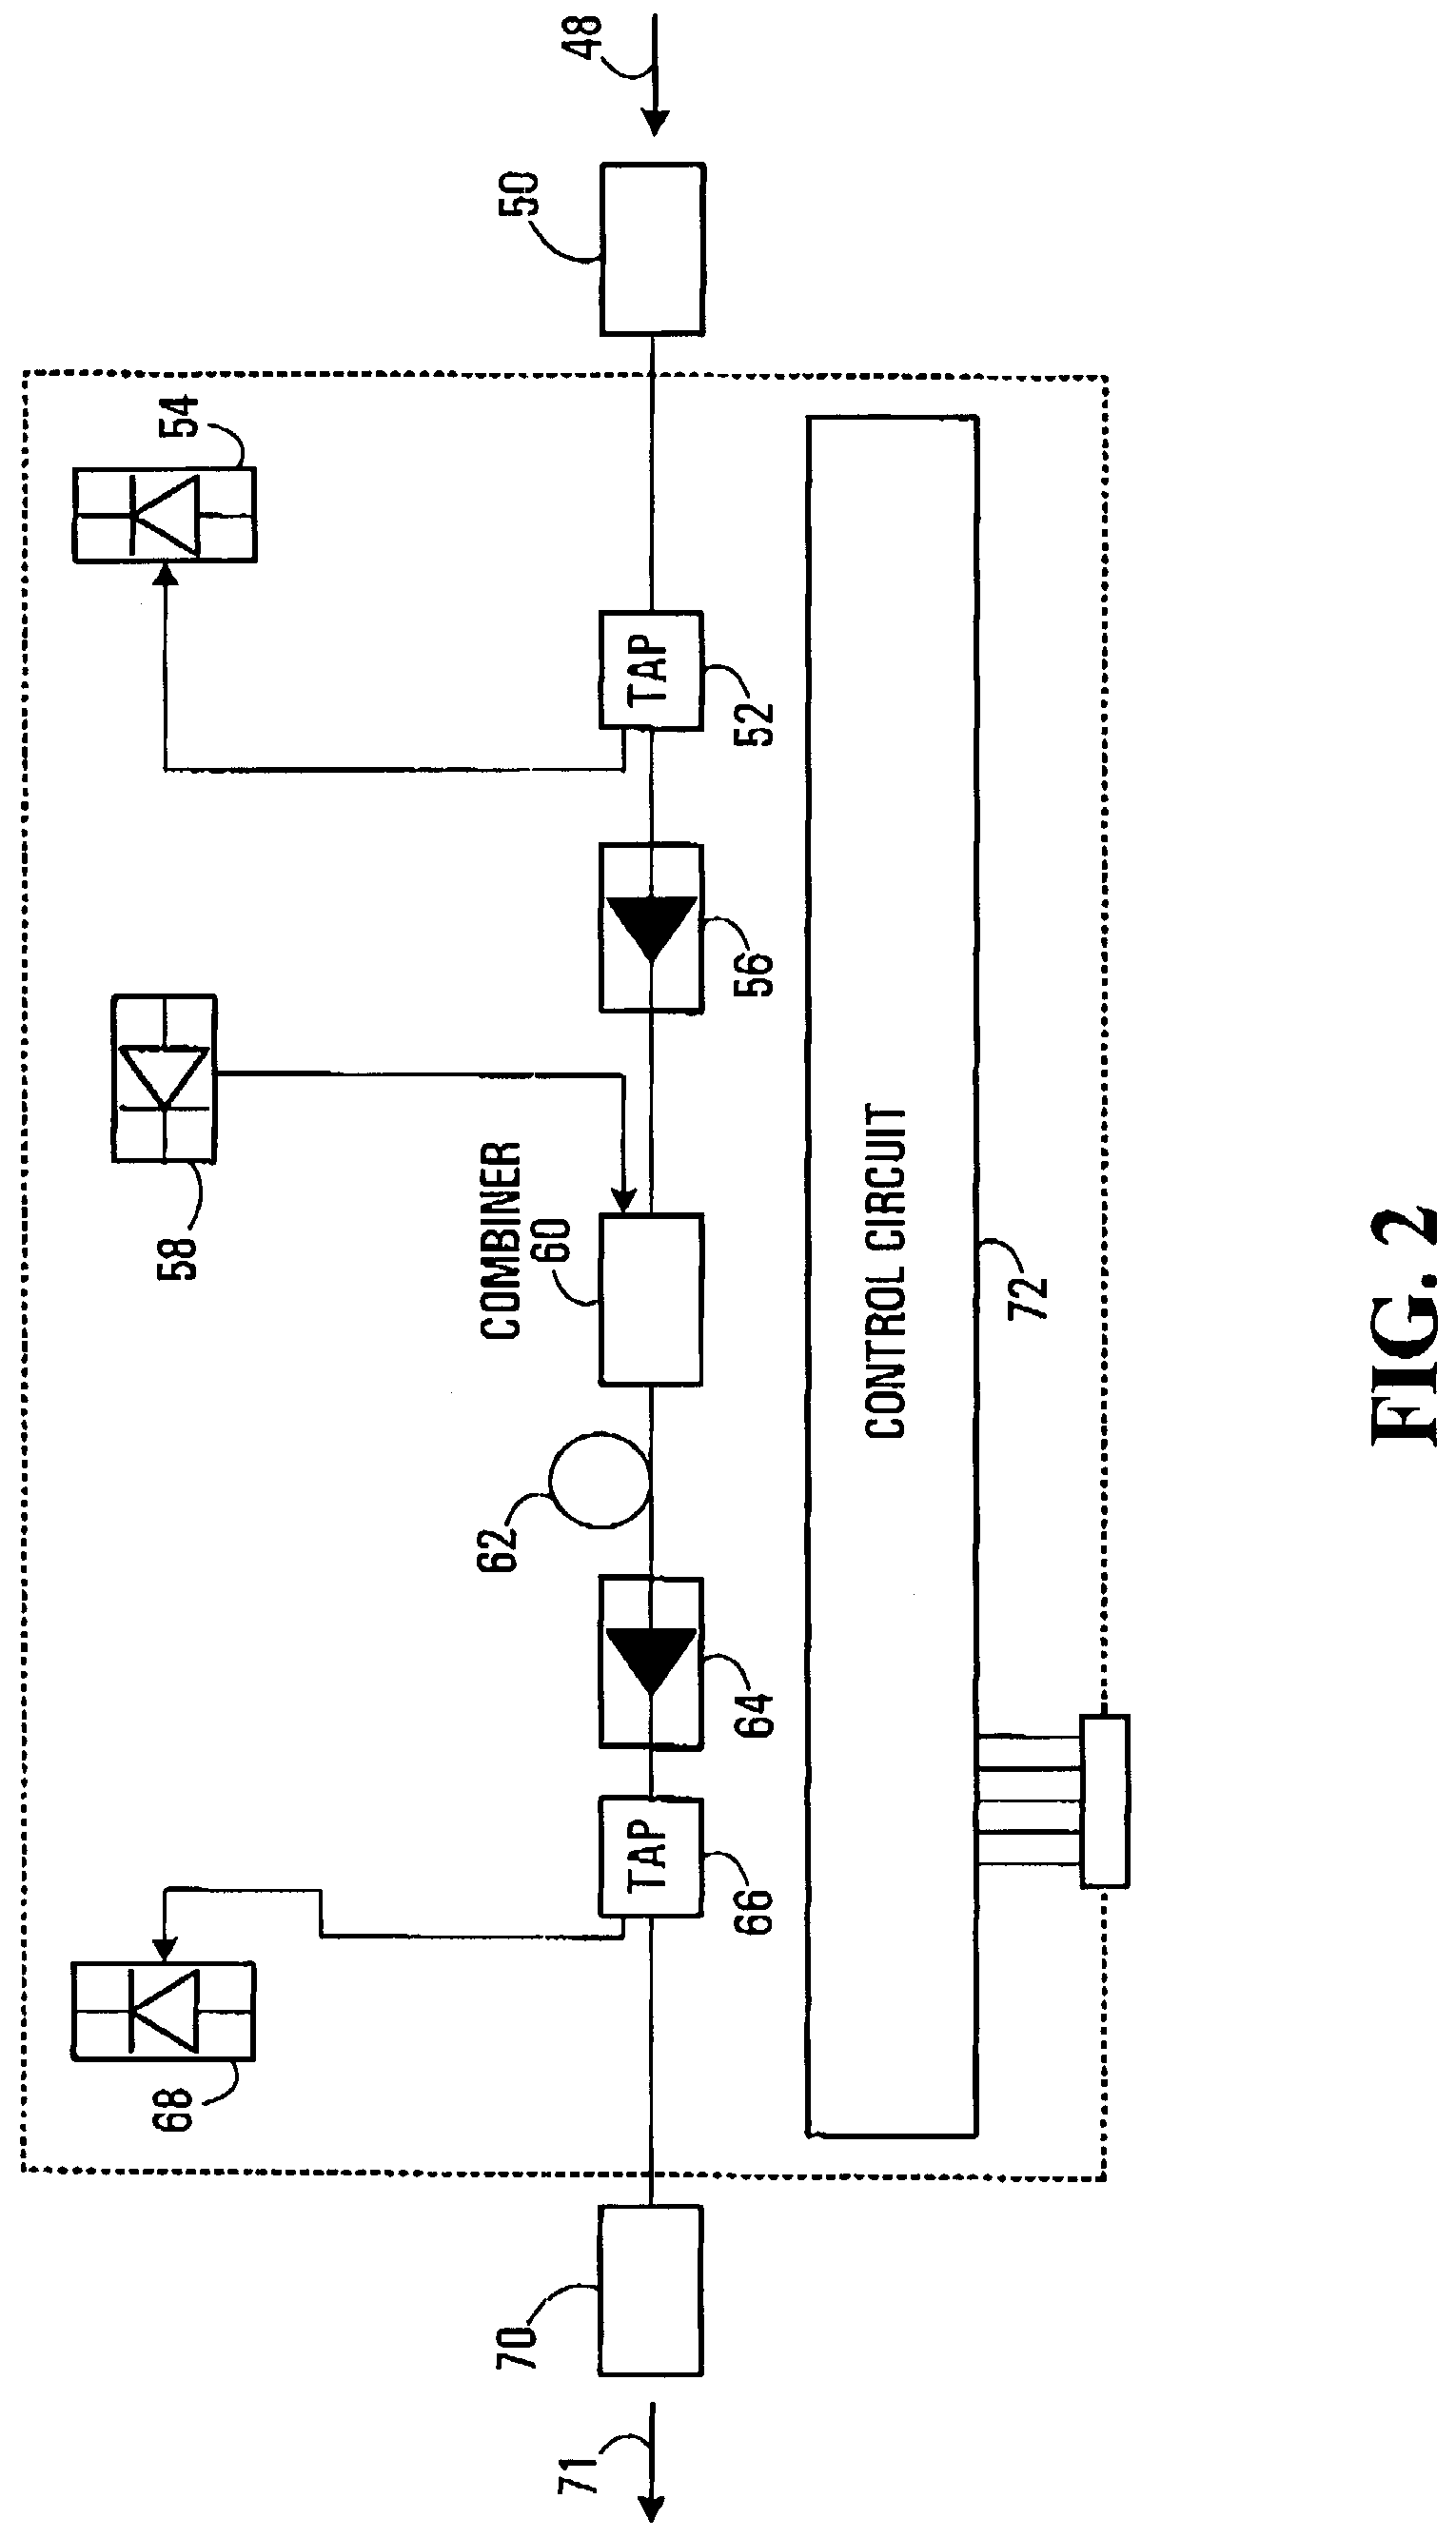 Integrated optical dual amplifier